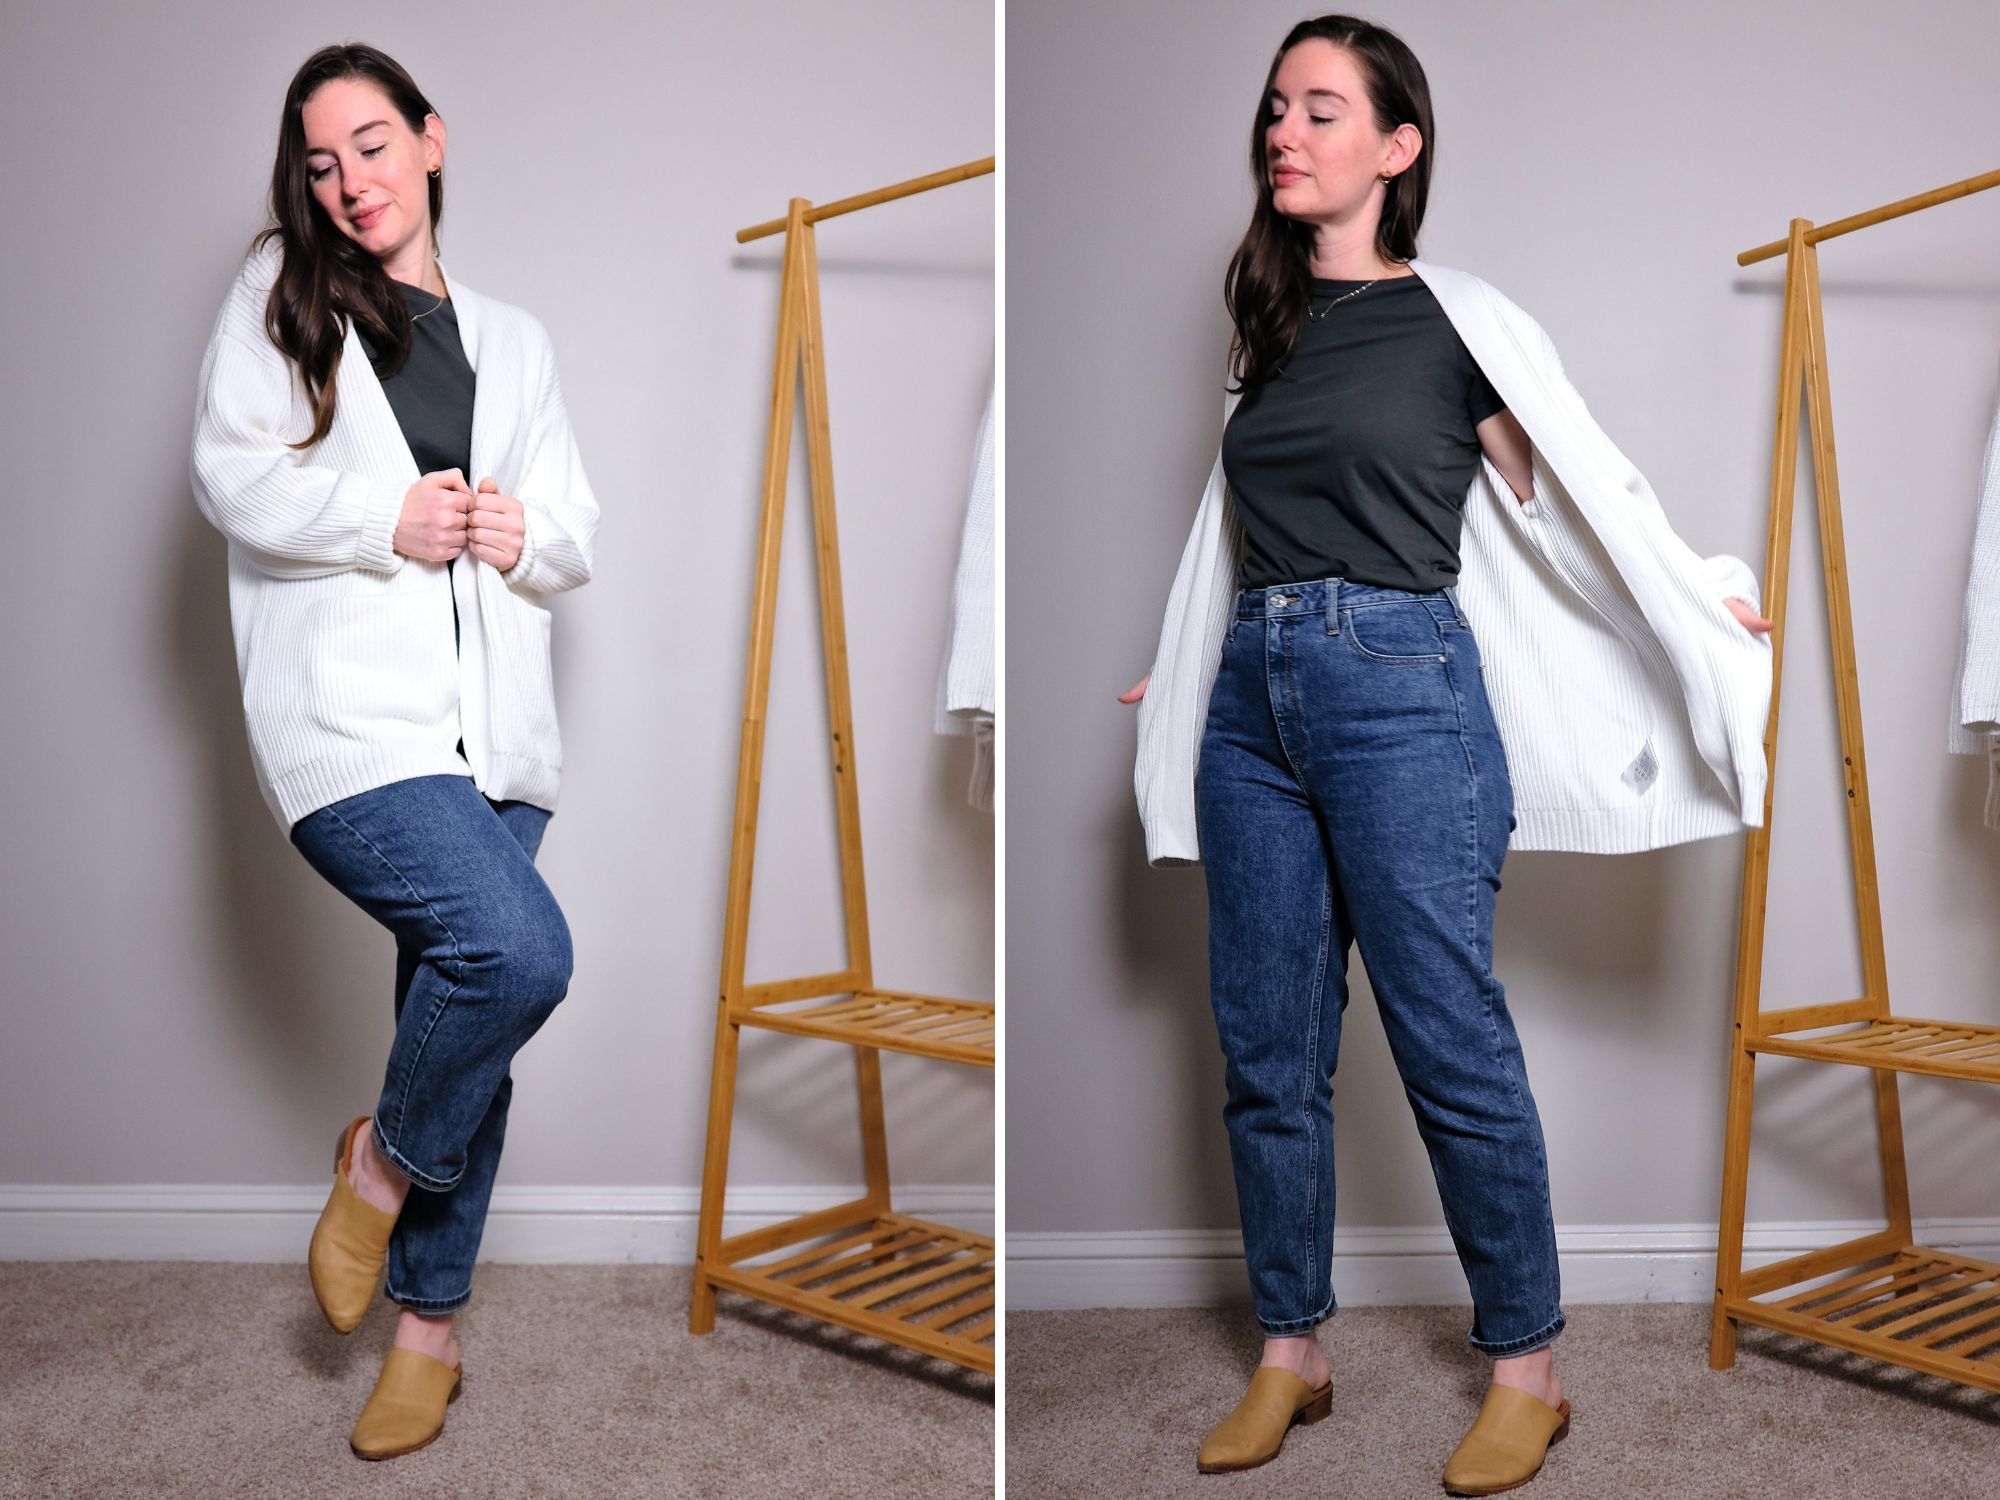 Alyssa wears Quince's Organic Cotton Oversized Cardigan with a green shirt and blue jeans